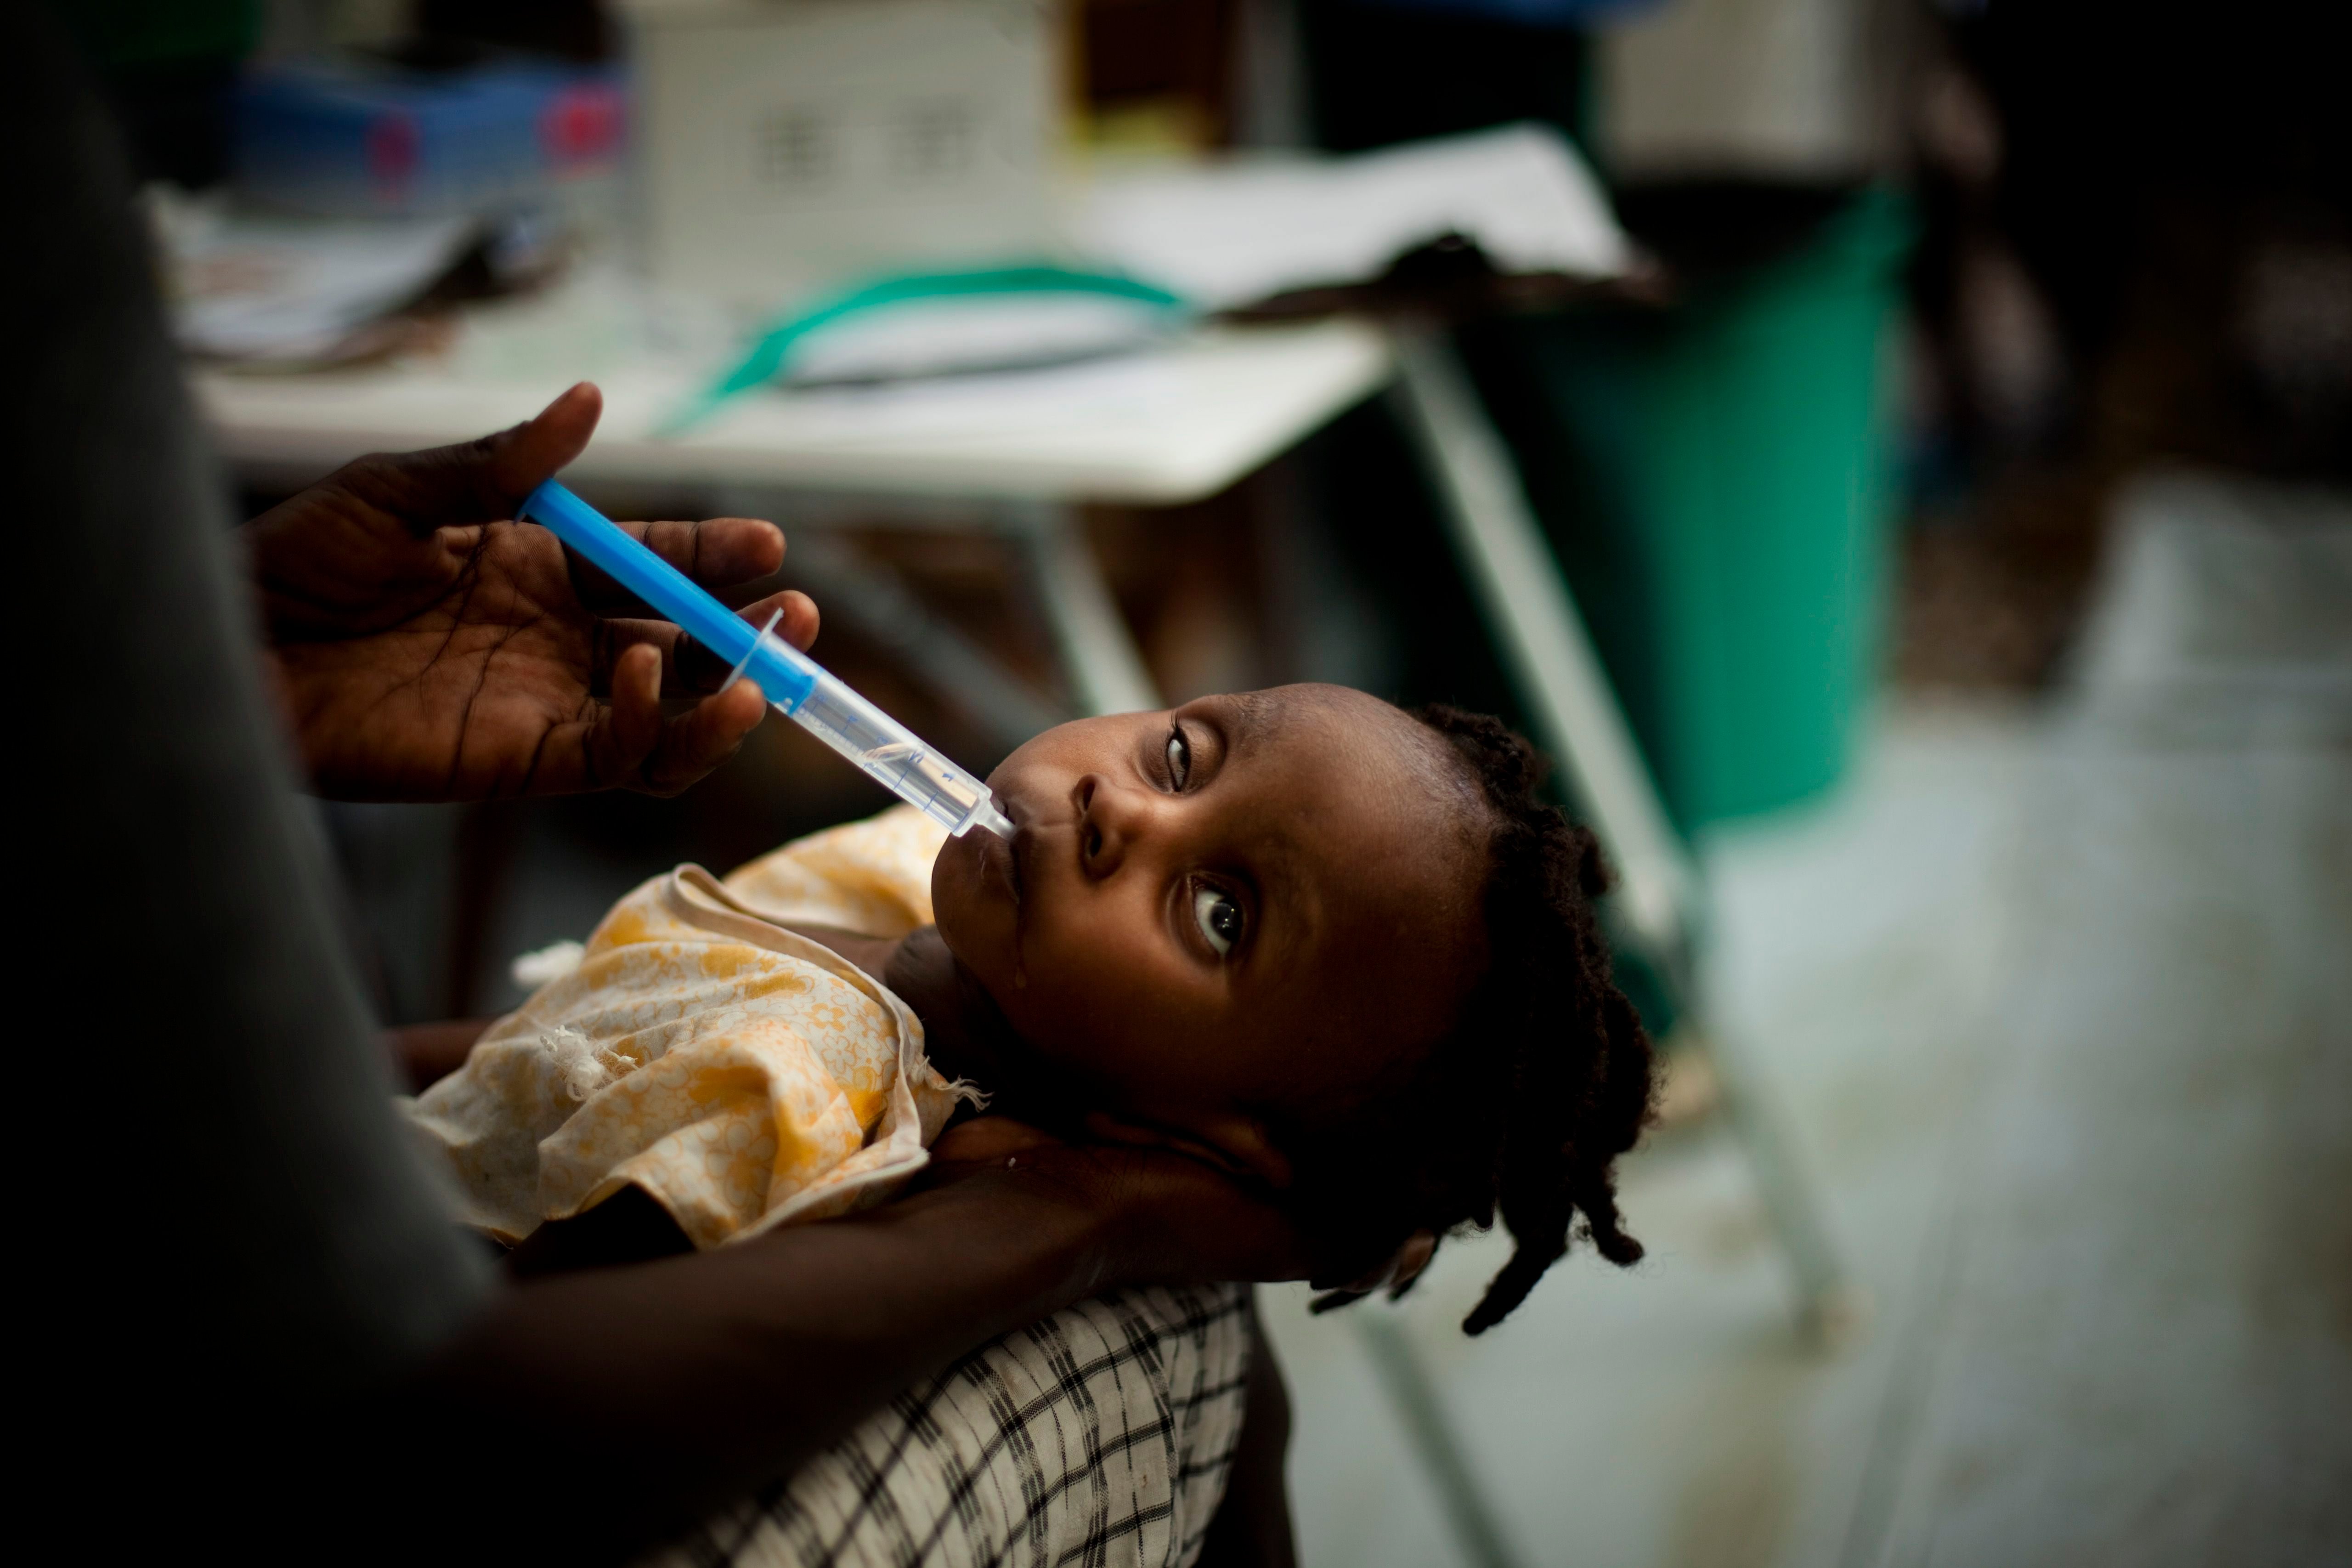 In this Nov. 12, 2010 file photo, a girl suffering cholera symptoms receives treatment at the Doctors Without Borders temporary hospital in Port-au-Prince, Haiti. (AP Photo)